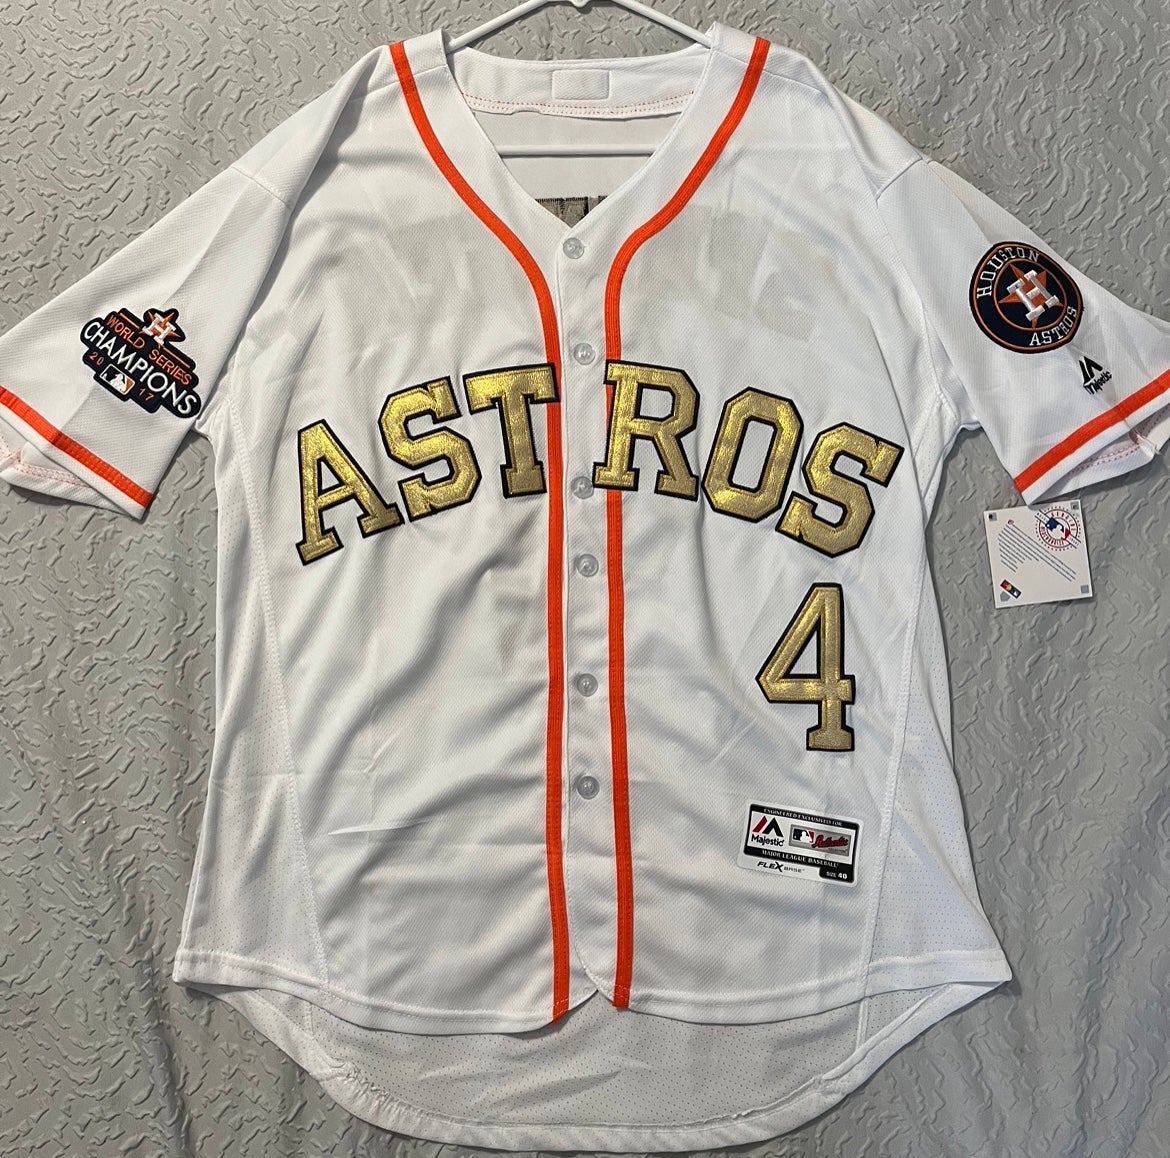 2019 George Springer Game-Used Los Astros White Home Jersey - Size 46